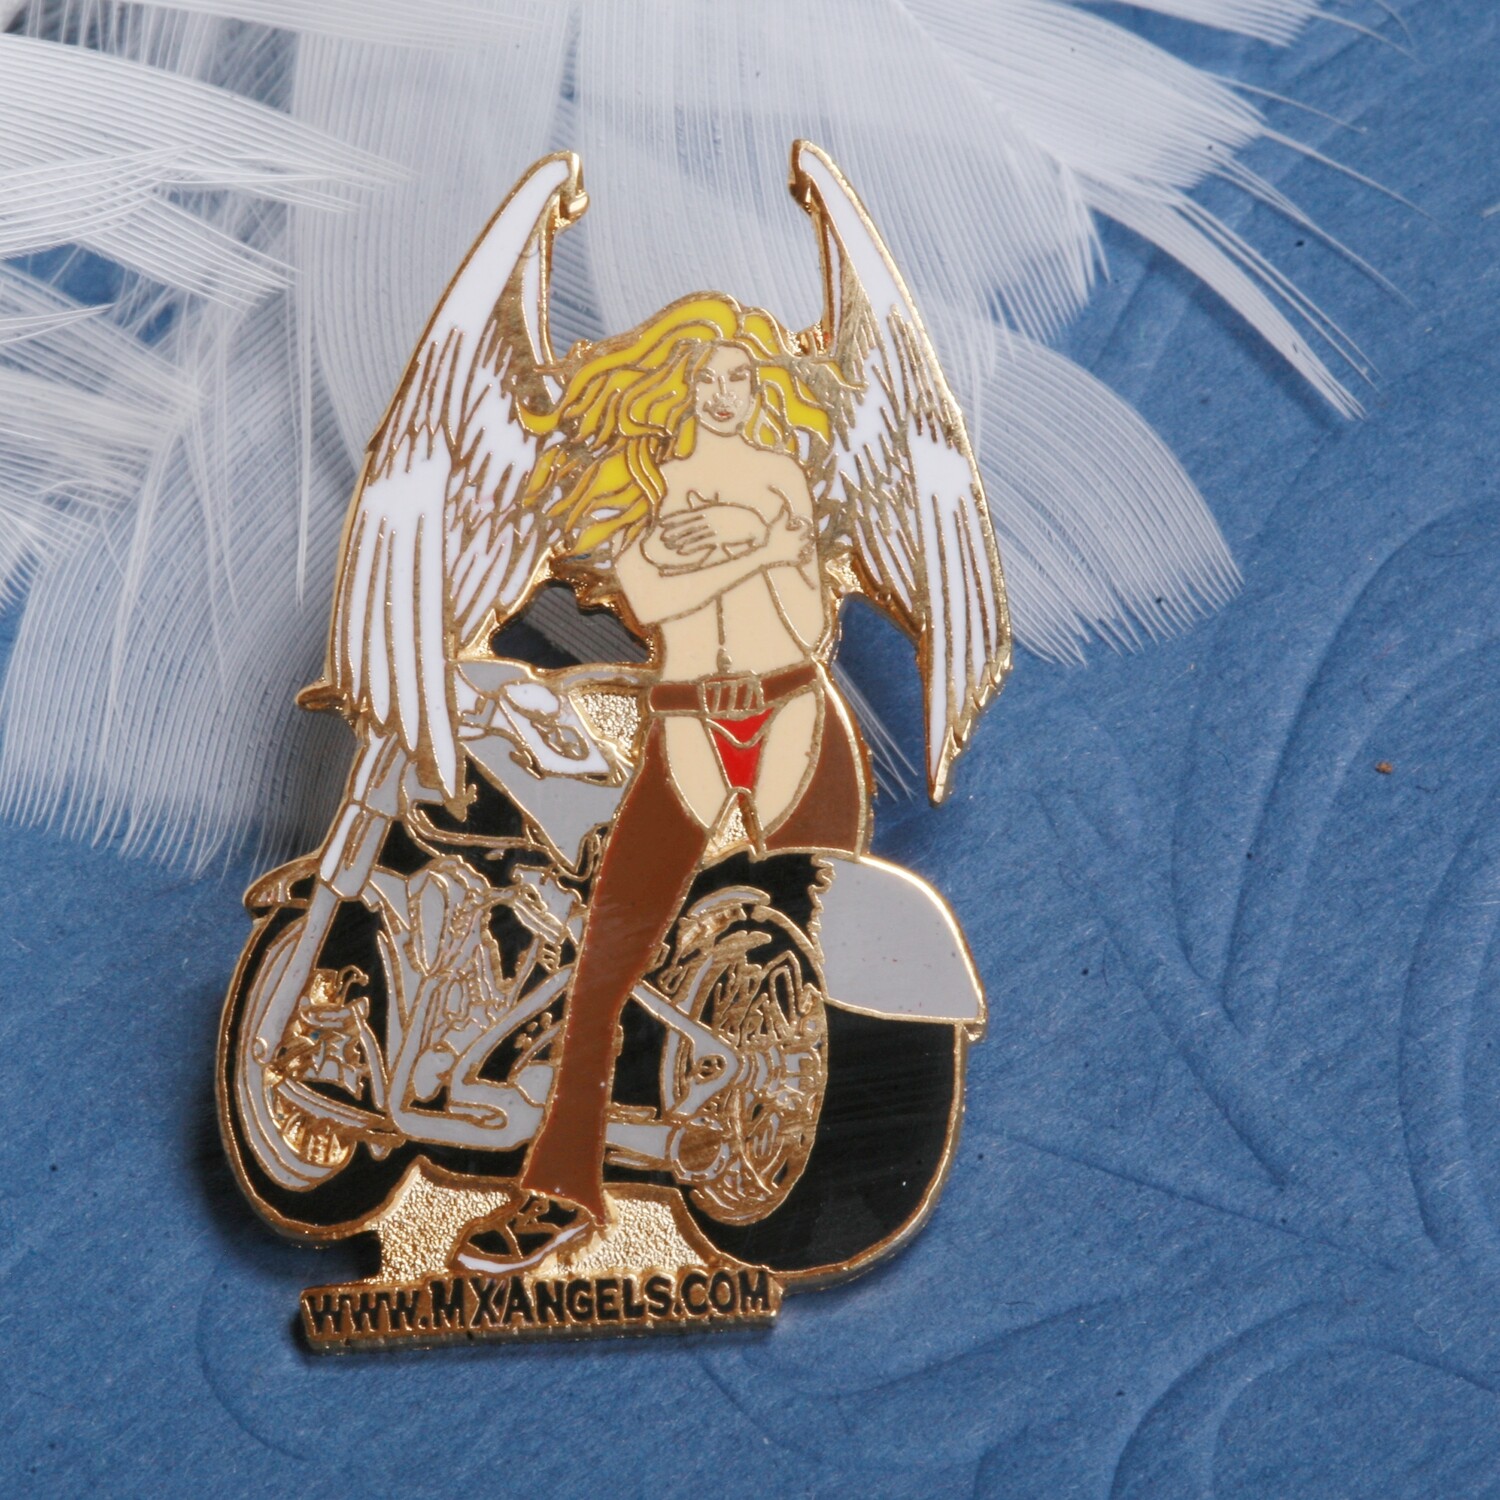 Abigail The Guardian Motorcycle Angel
Pin